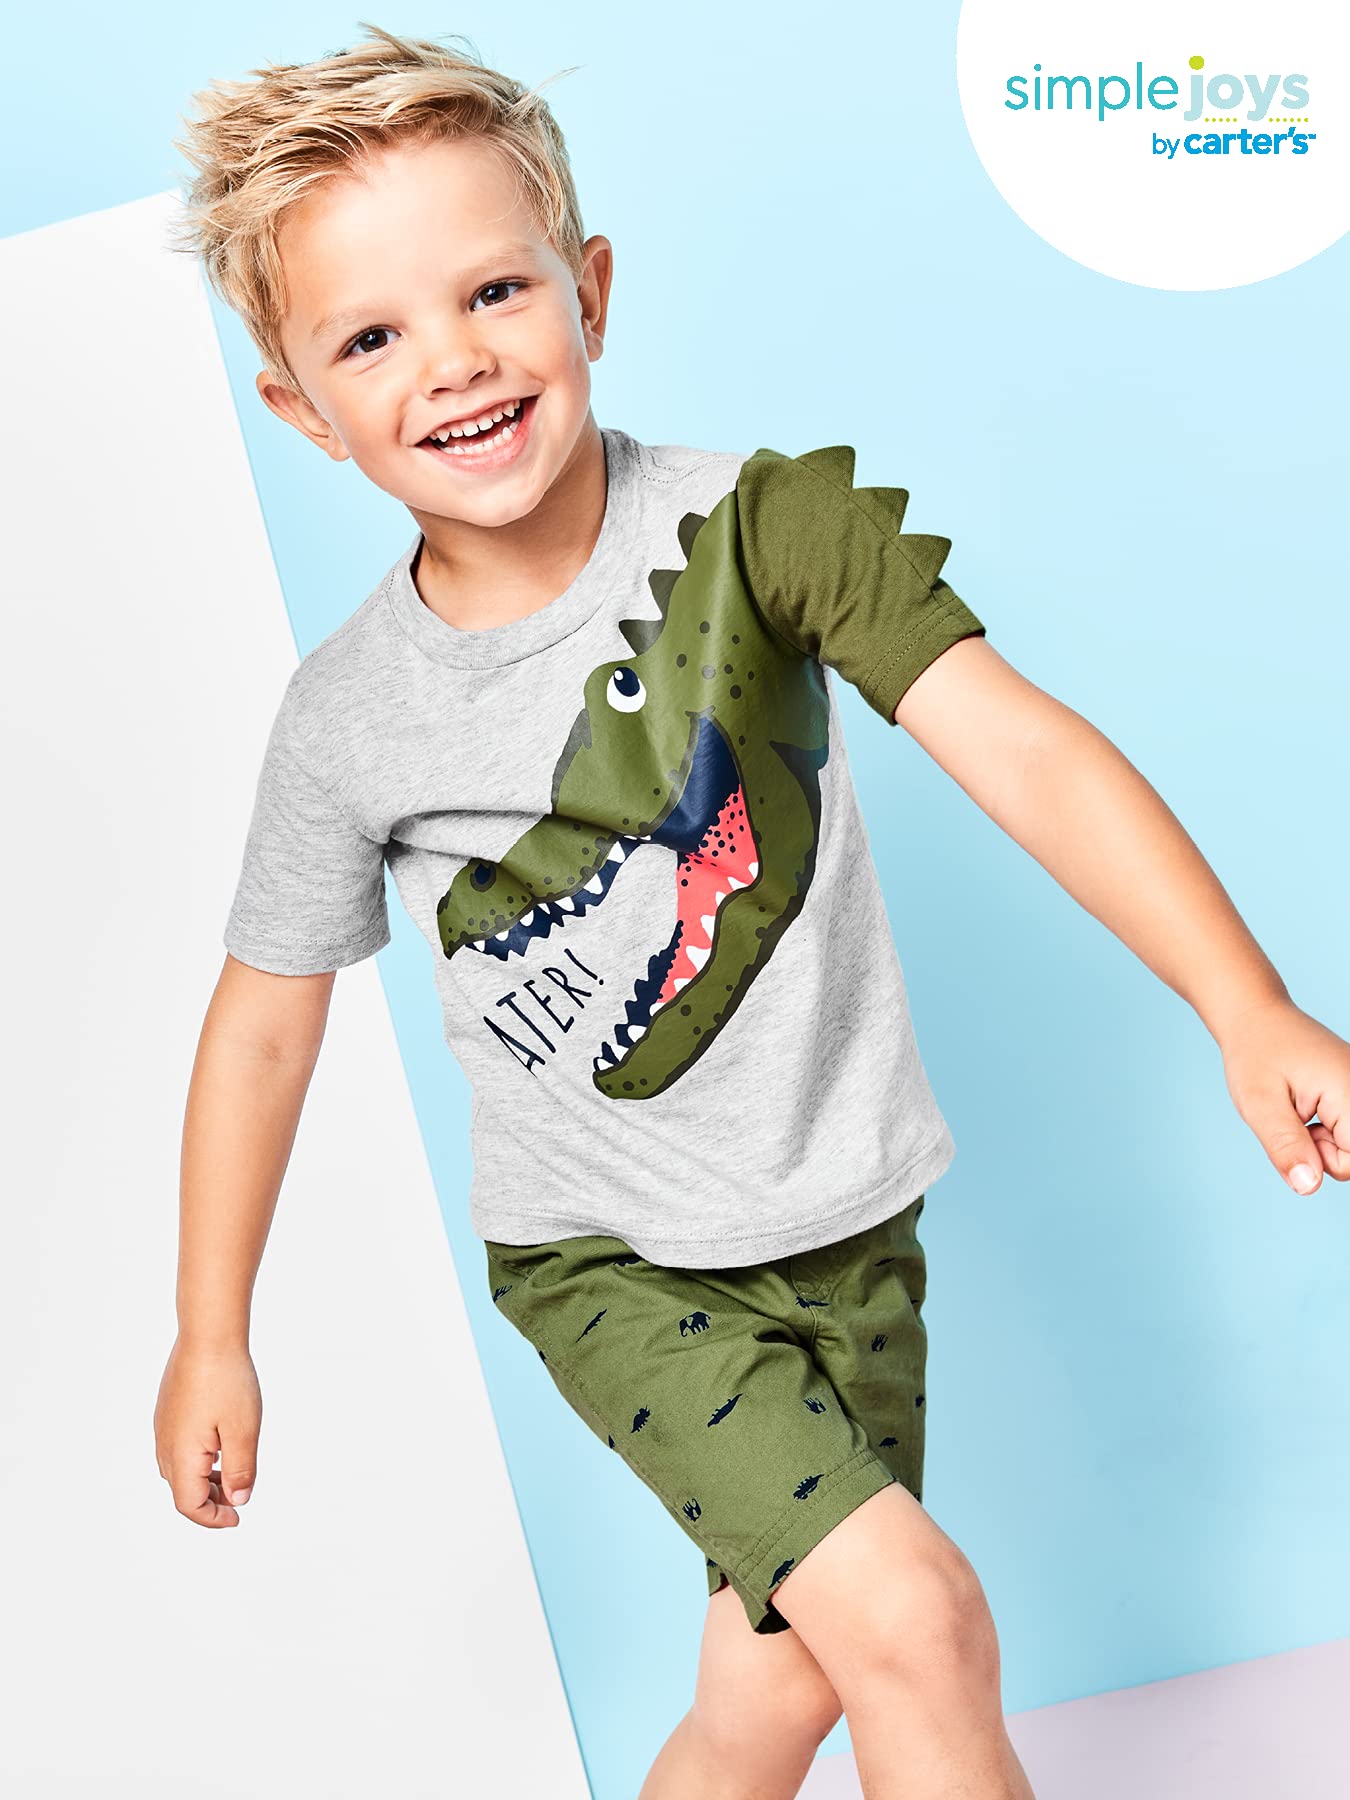 Simple Joys by Carter's Toddlers and Baby Boys' 3-Piece Button-Up, Shorts, and Tee Playwear Set